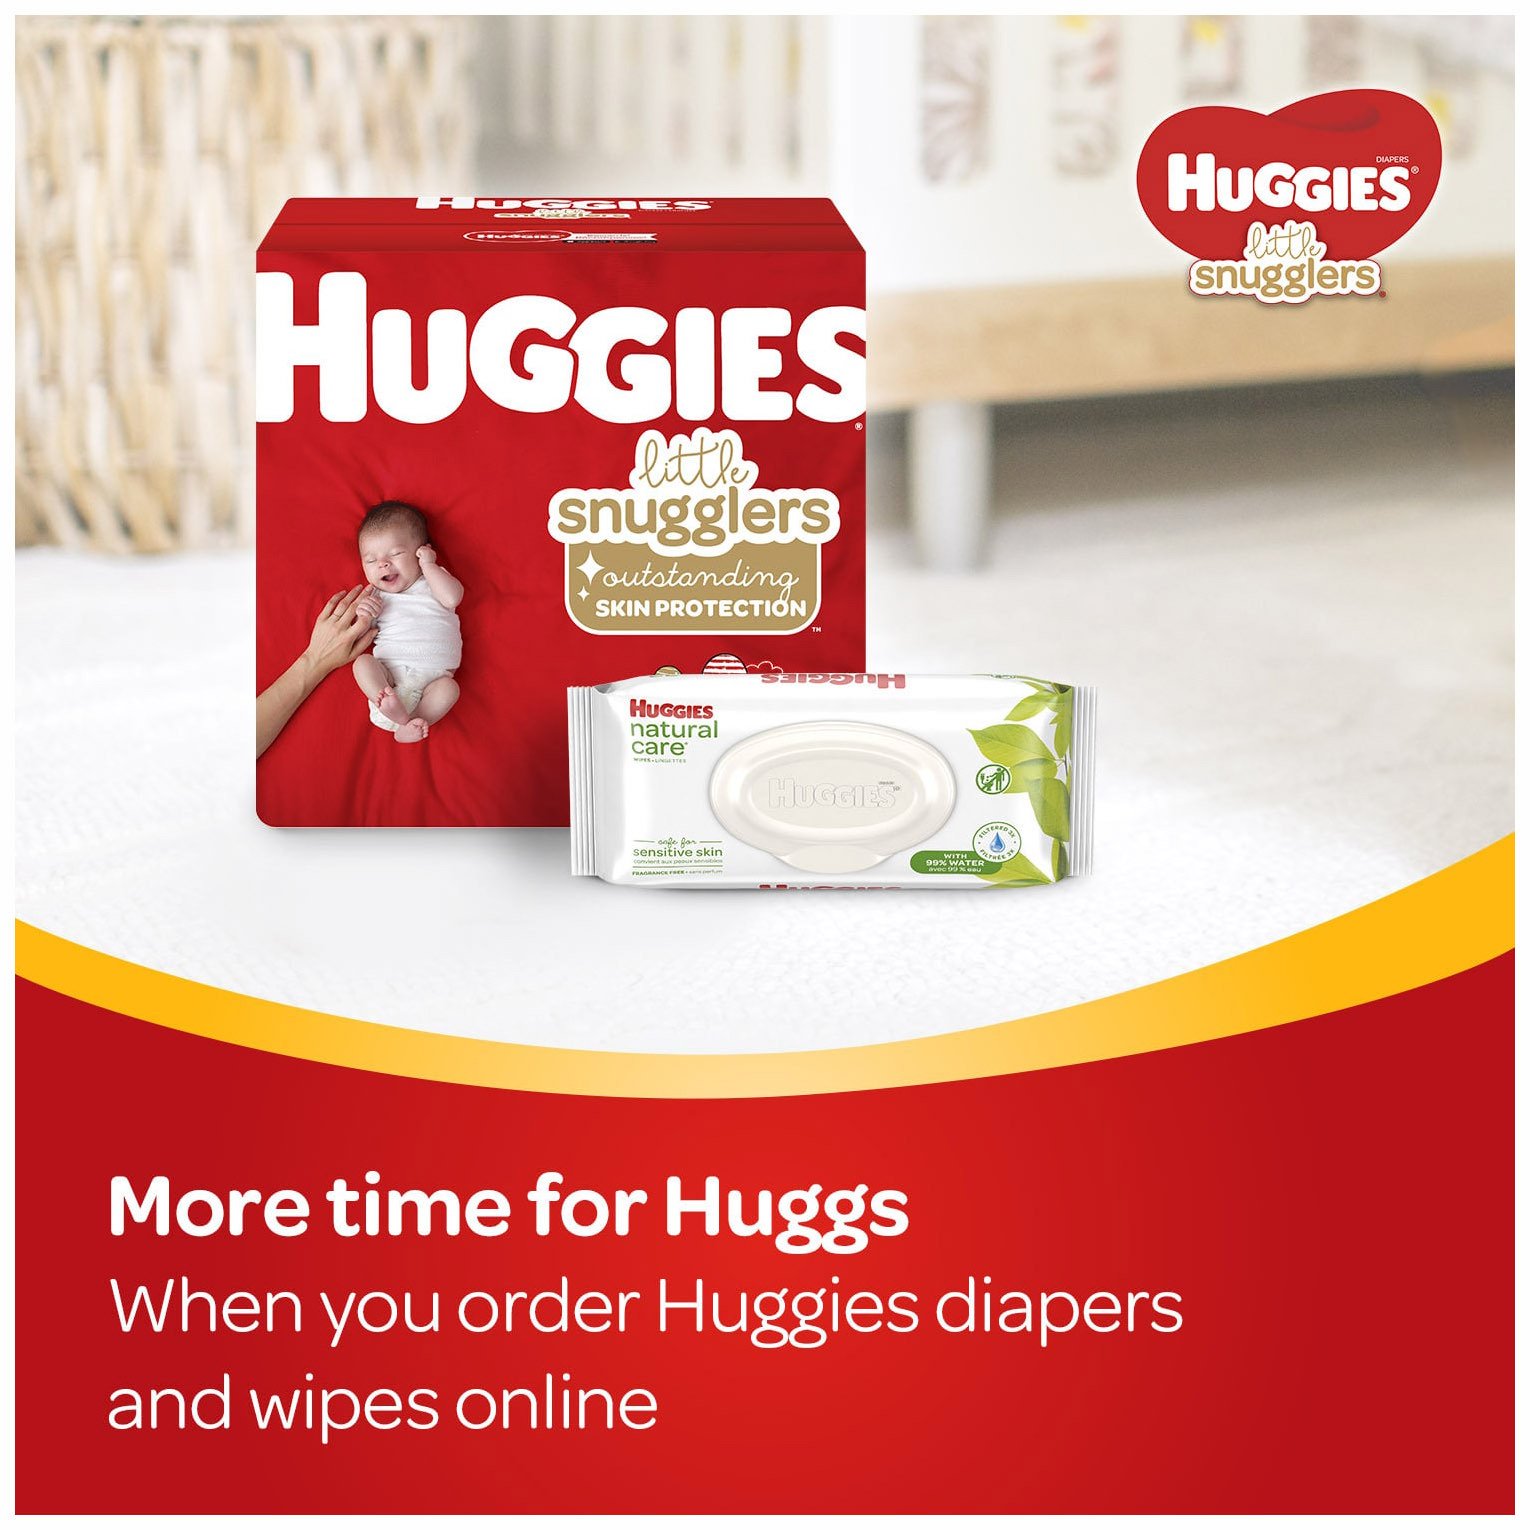 Huggies Newborn Gift Box - Little Snugglers Diapers (Size Newborn, 24 Ct & Size 1, 32 Ct), Natural Care Wipes (96 Ct) & Johnson's Baby Shampoo & Lotion - image 10 of 13